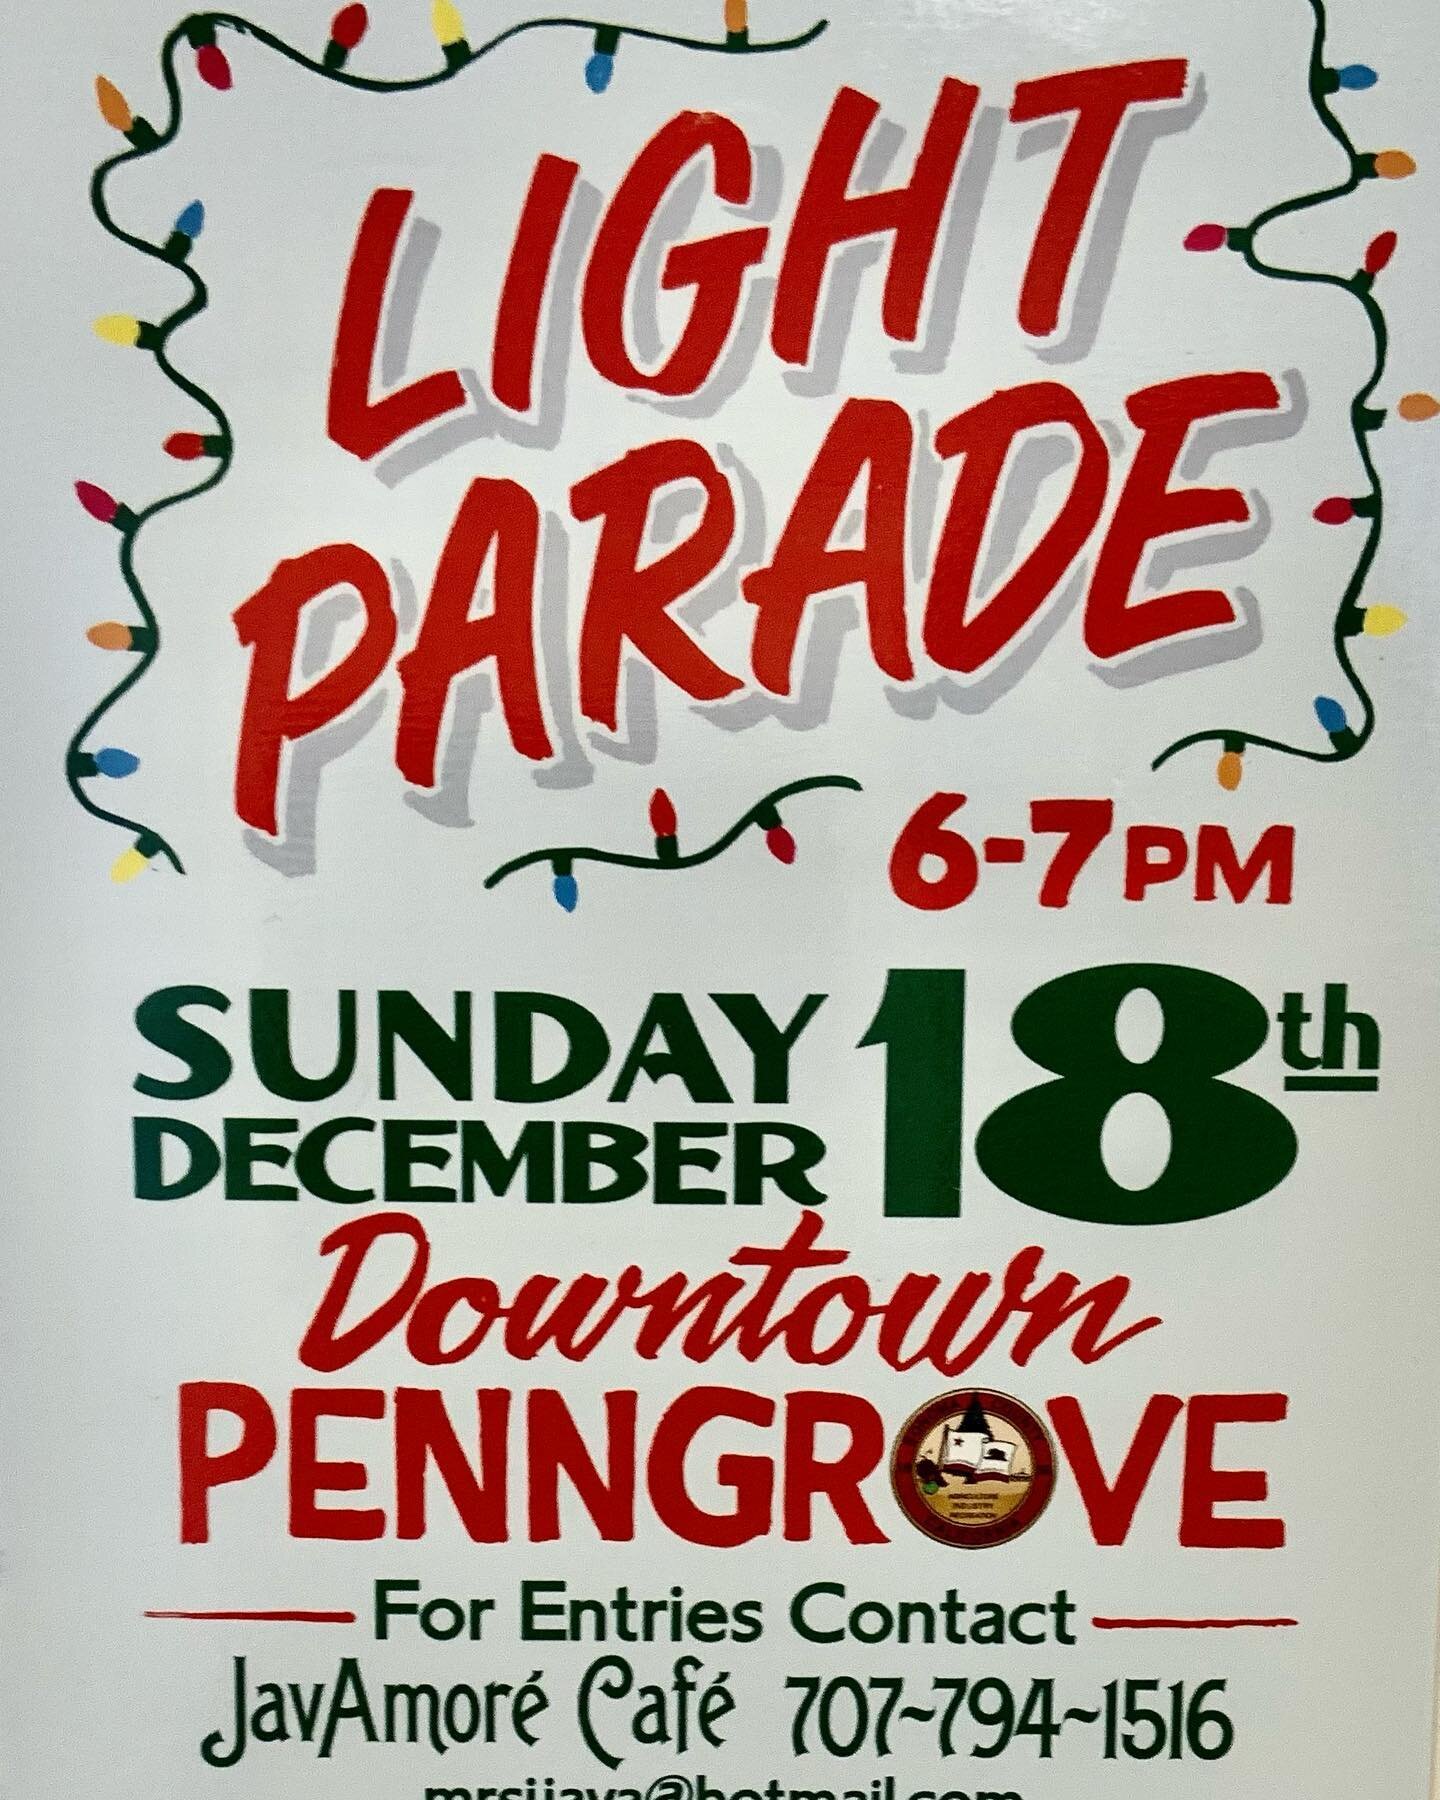 Penngrove Holiday Parade of Lights
December 18th,2022
 
Bundle up, and come down to Main Street for the 4th annual Penngrove Holiday Parade of Lights on Sunday, December 18 from 6:00 PM to 7:00 PM. Penngrove Social Firemen offer the spectacle of glam